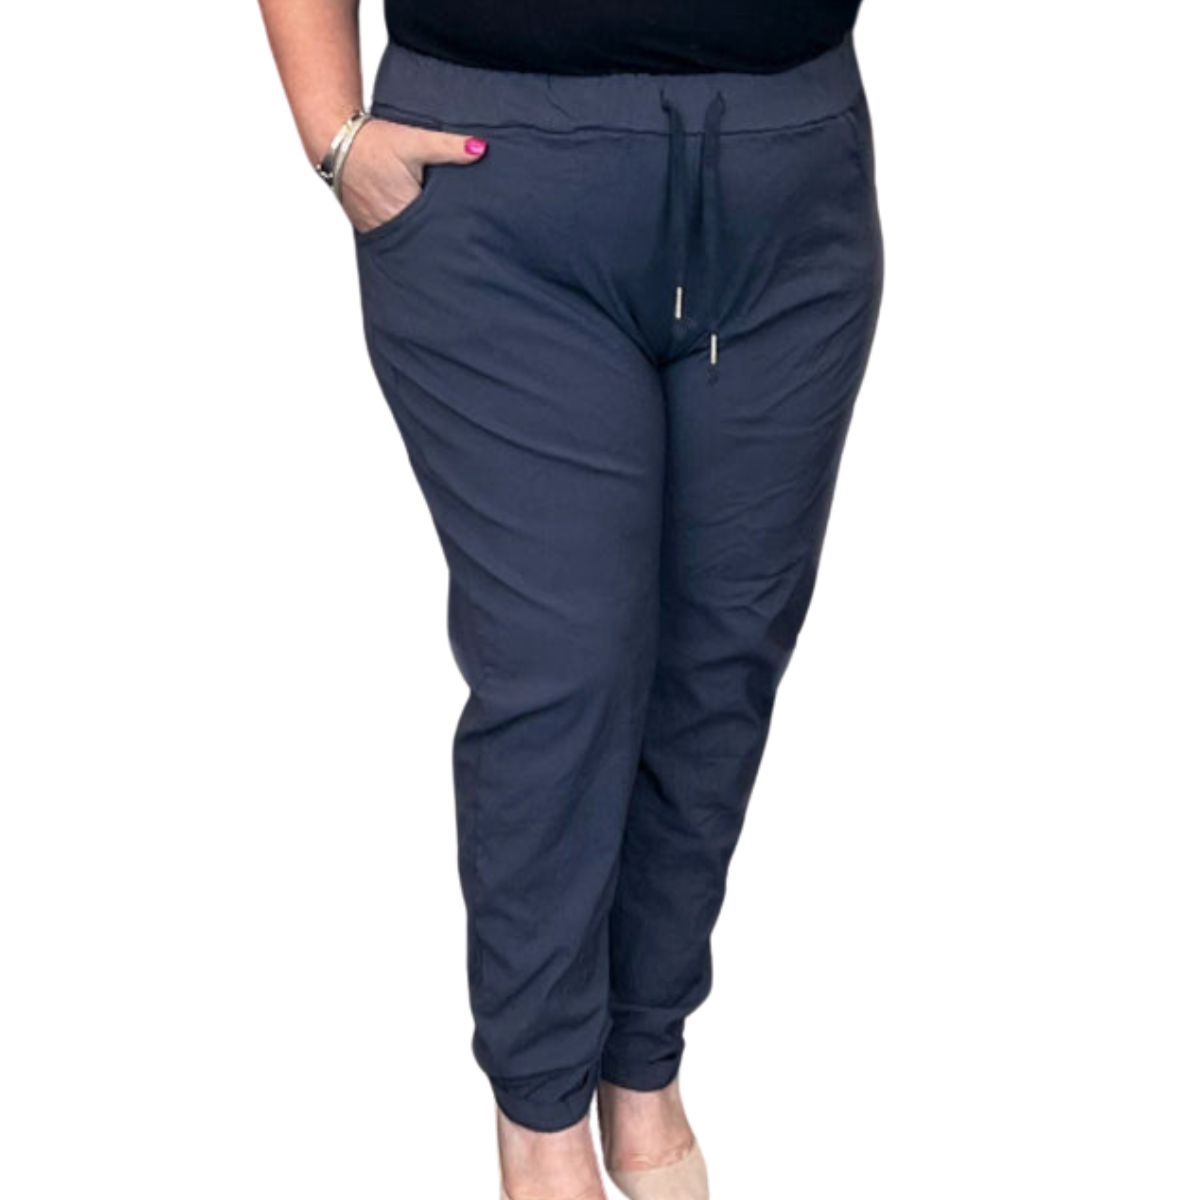 VERY STRETCHY PLAIN COMFY TROUSERS / JEANS WITH SIDE POCKETS